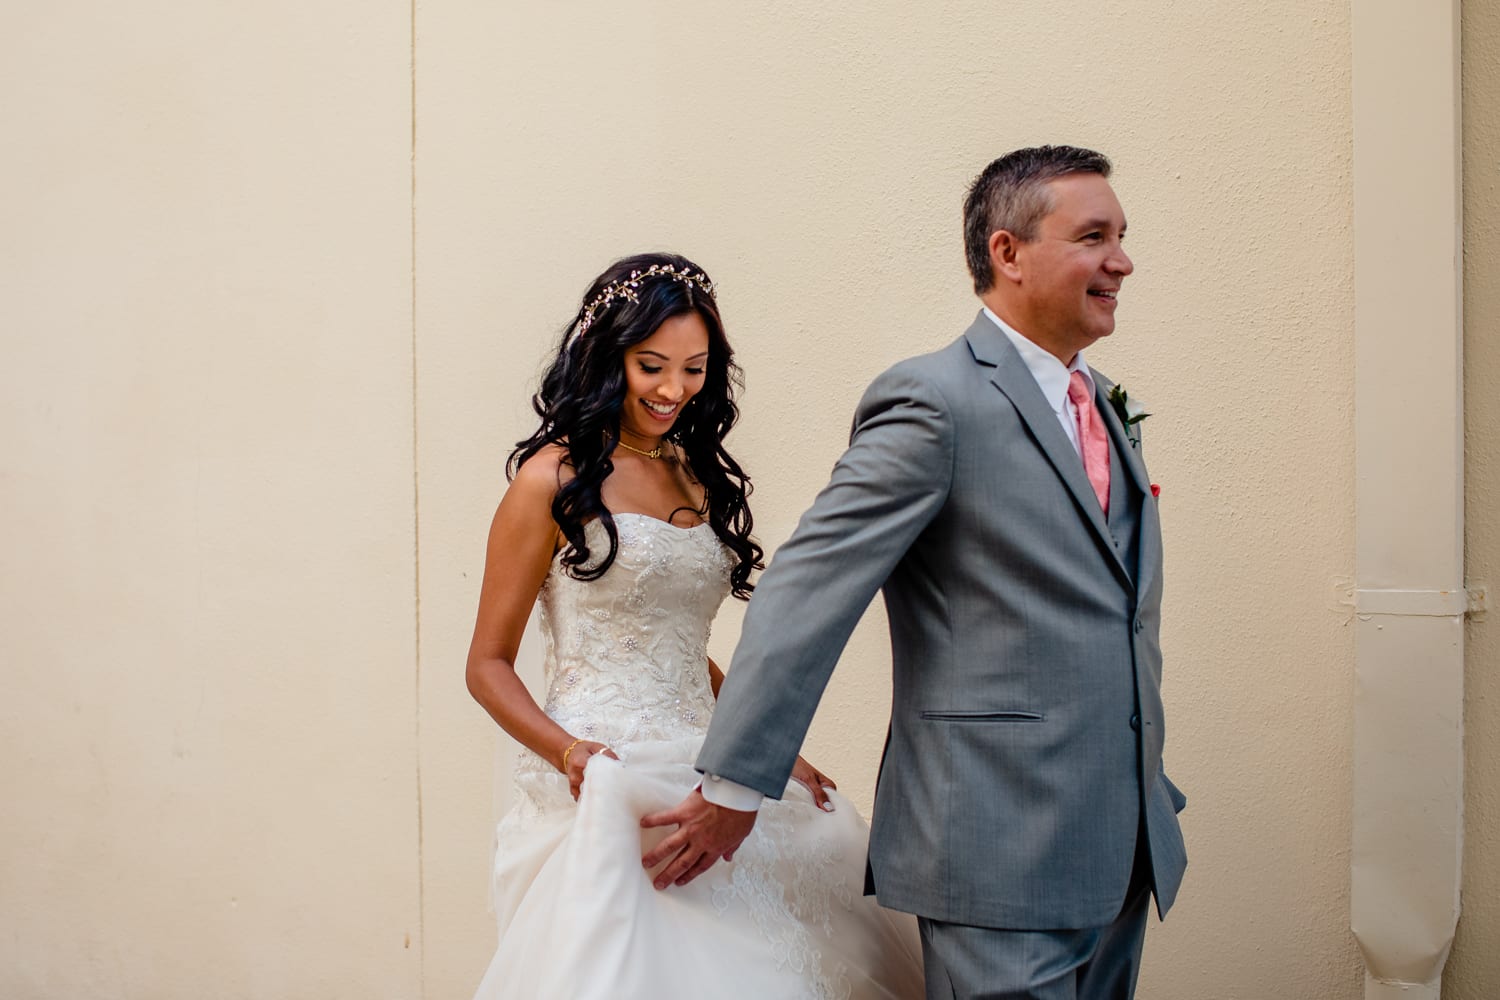 A bride and groom holding hands in front of a building.